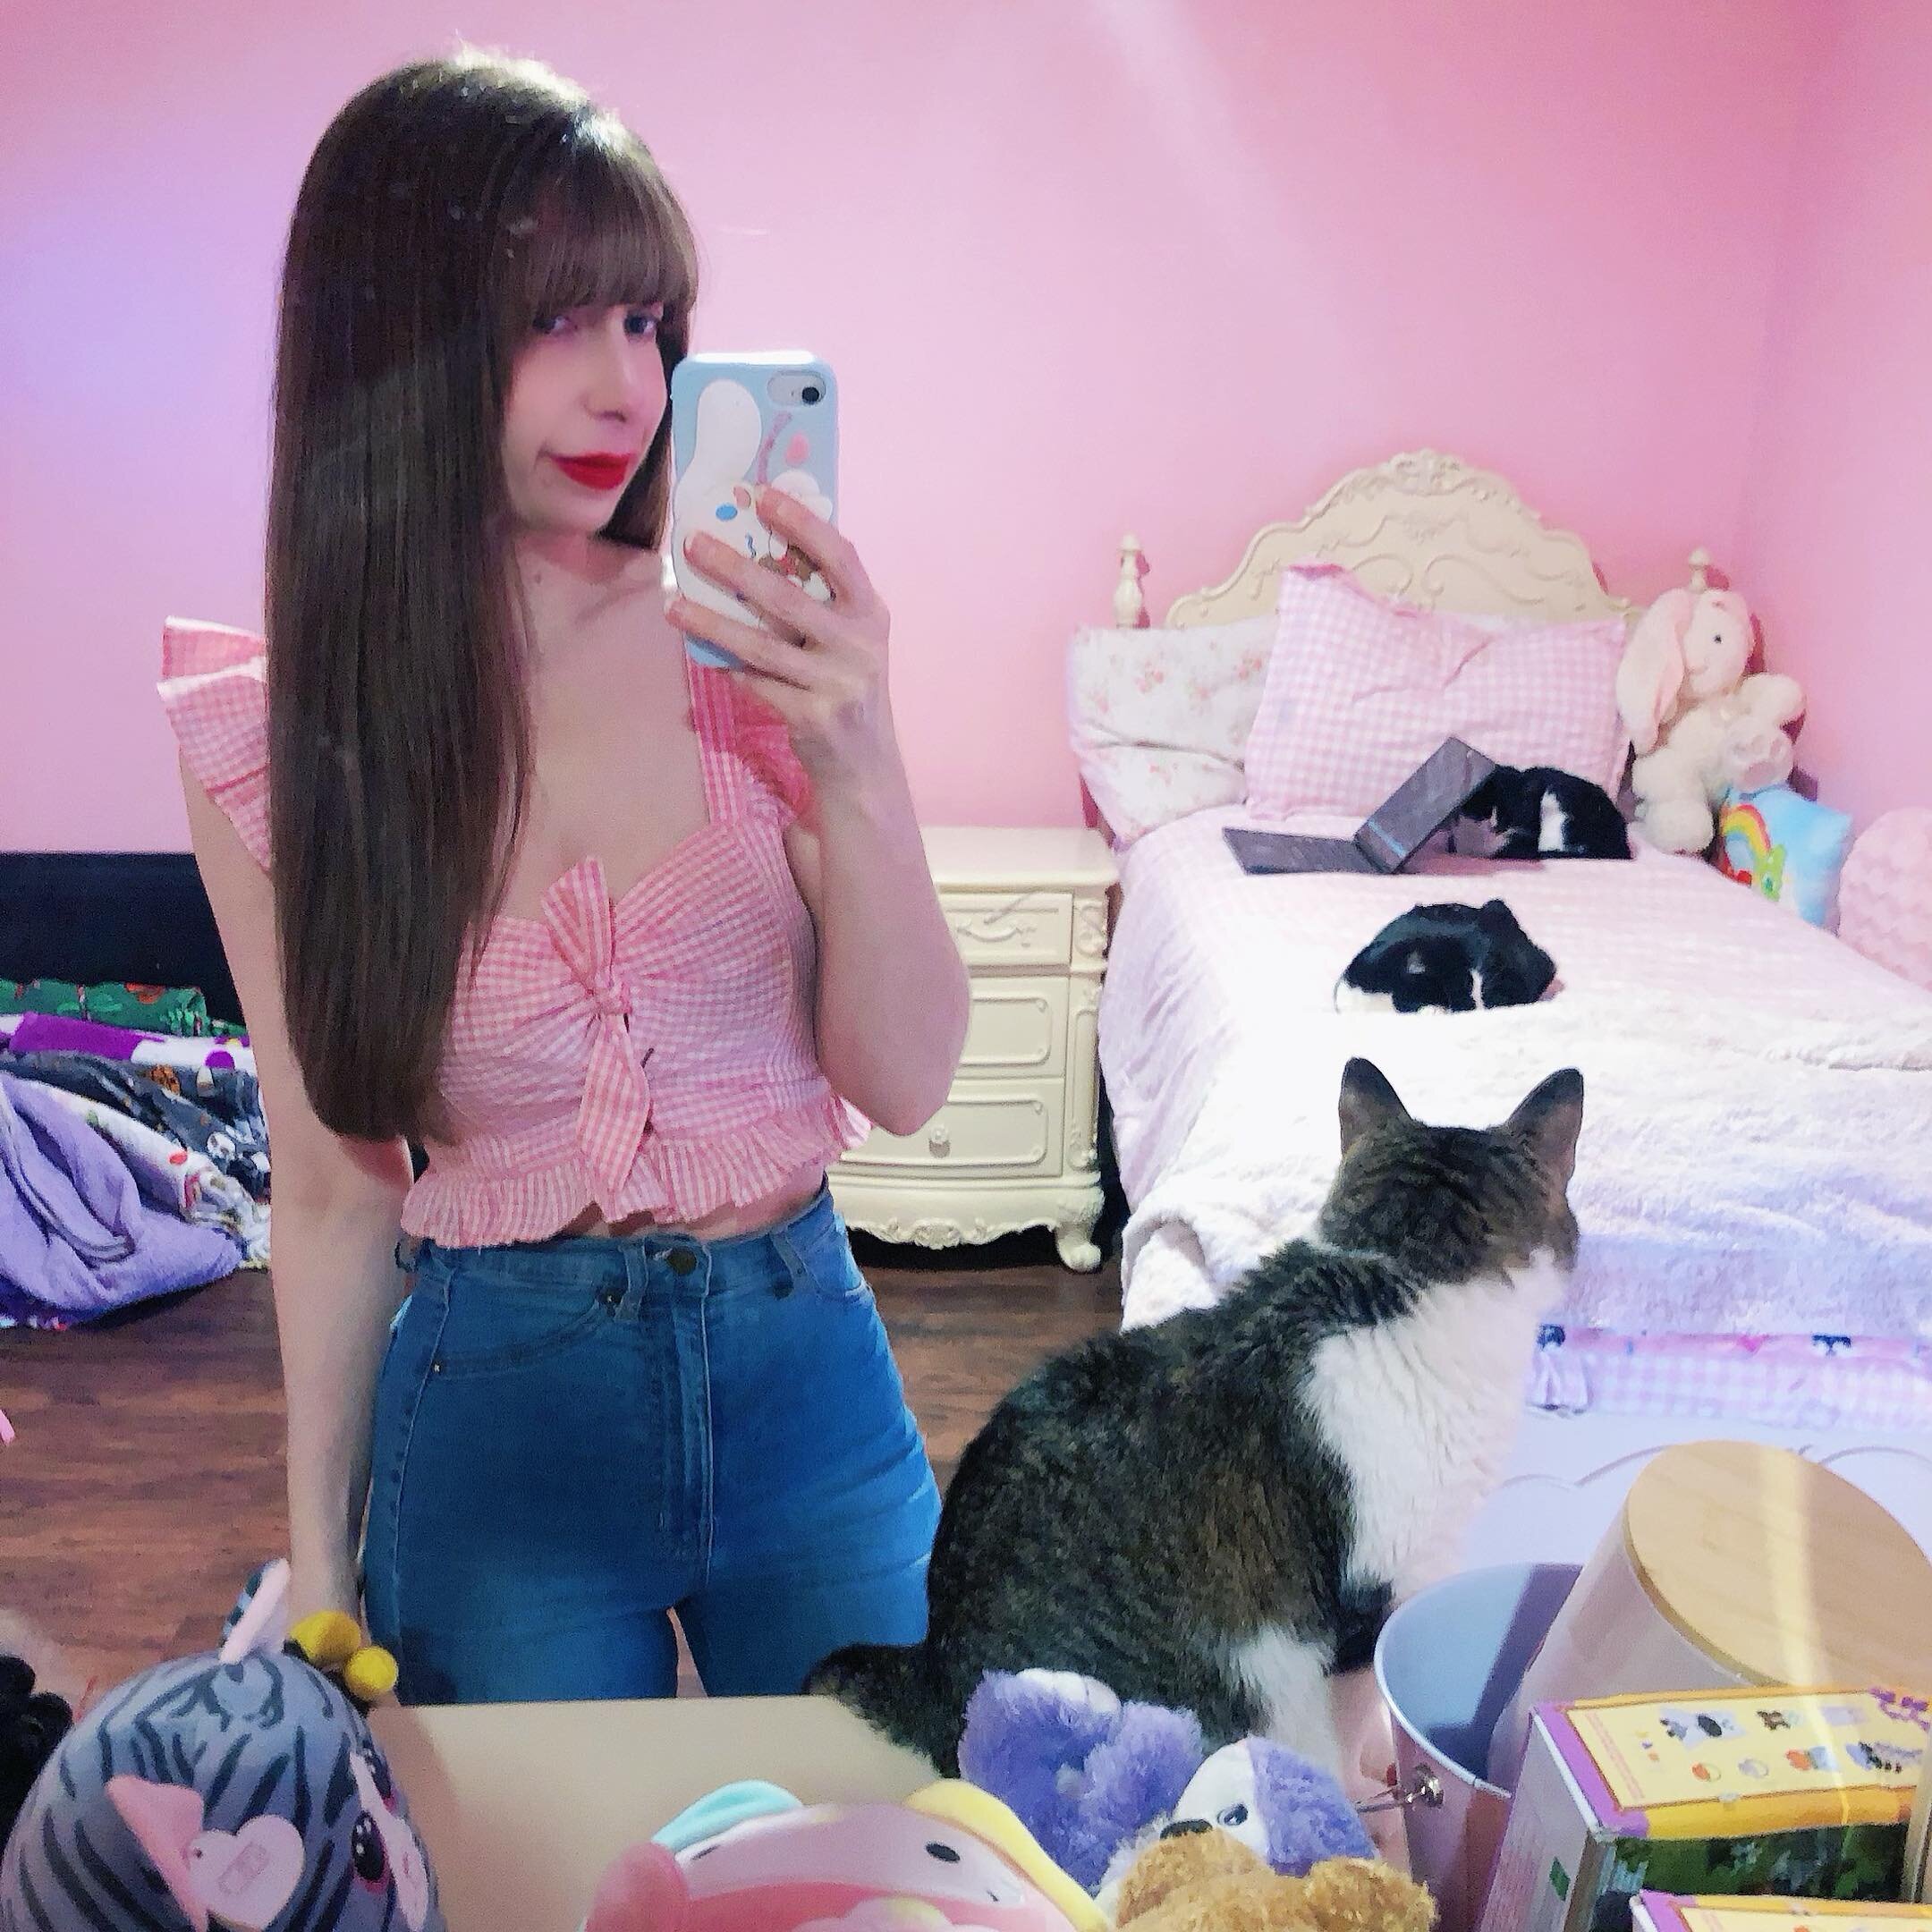 I moved my bed around and the cats approve! 💕🐱 I really need to decorate my room better. If only money wasn&rsquo;t an issue&hellip;lol&hellip; I&rsquo;m wearing my favorite top! Pink, Gingham and Ruffles! 💕💕💕
.
#margaritabloom #selfie #outfit #